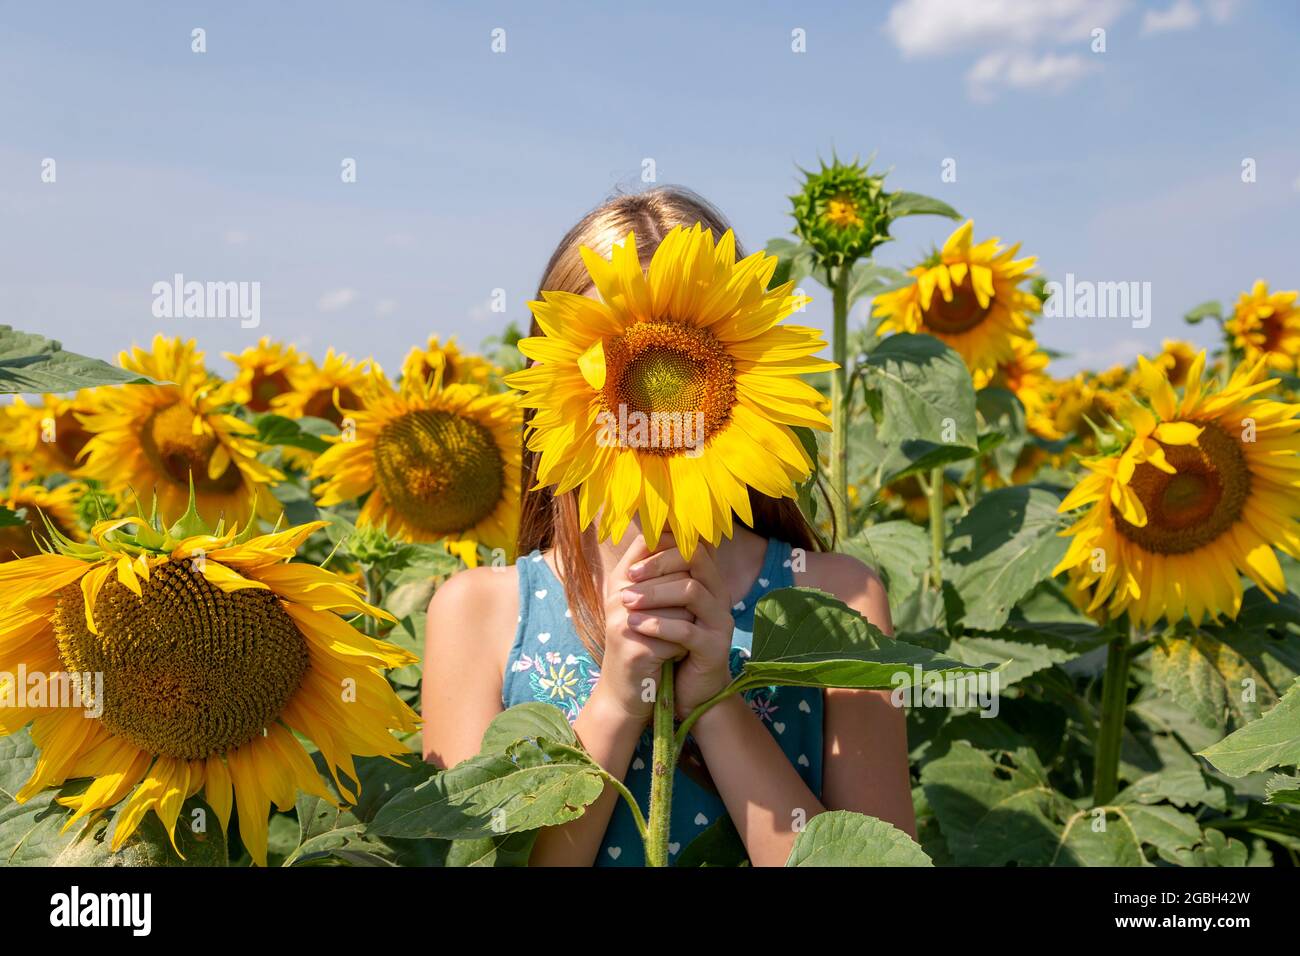 Girl holding sunflower in front of her face in the field. Generation Z. Stock Photo